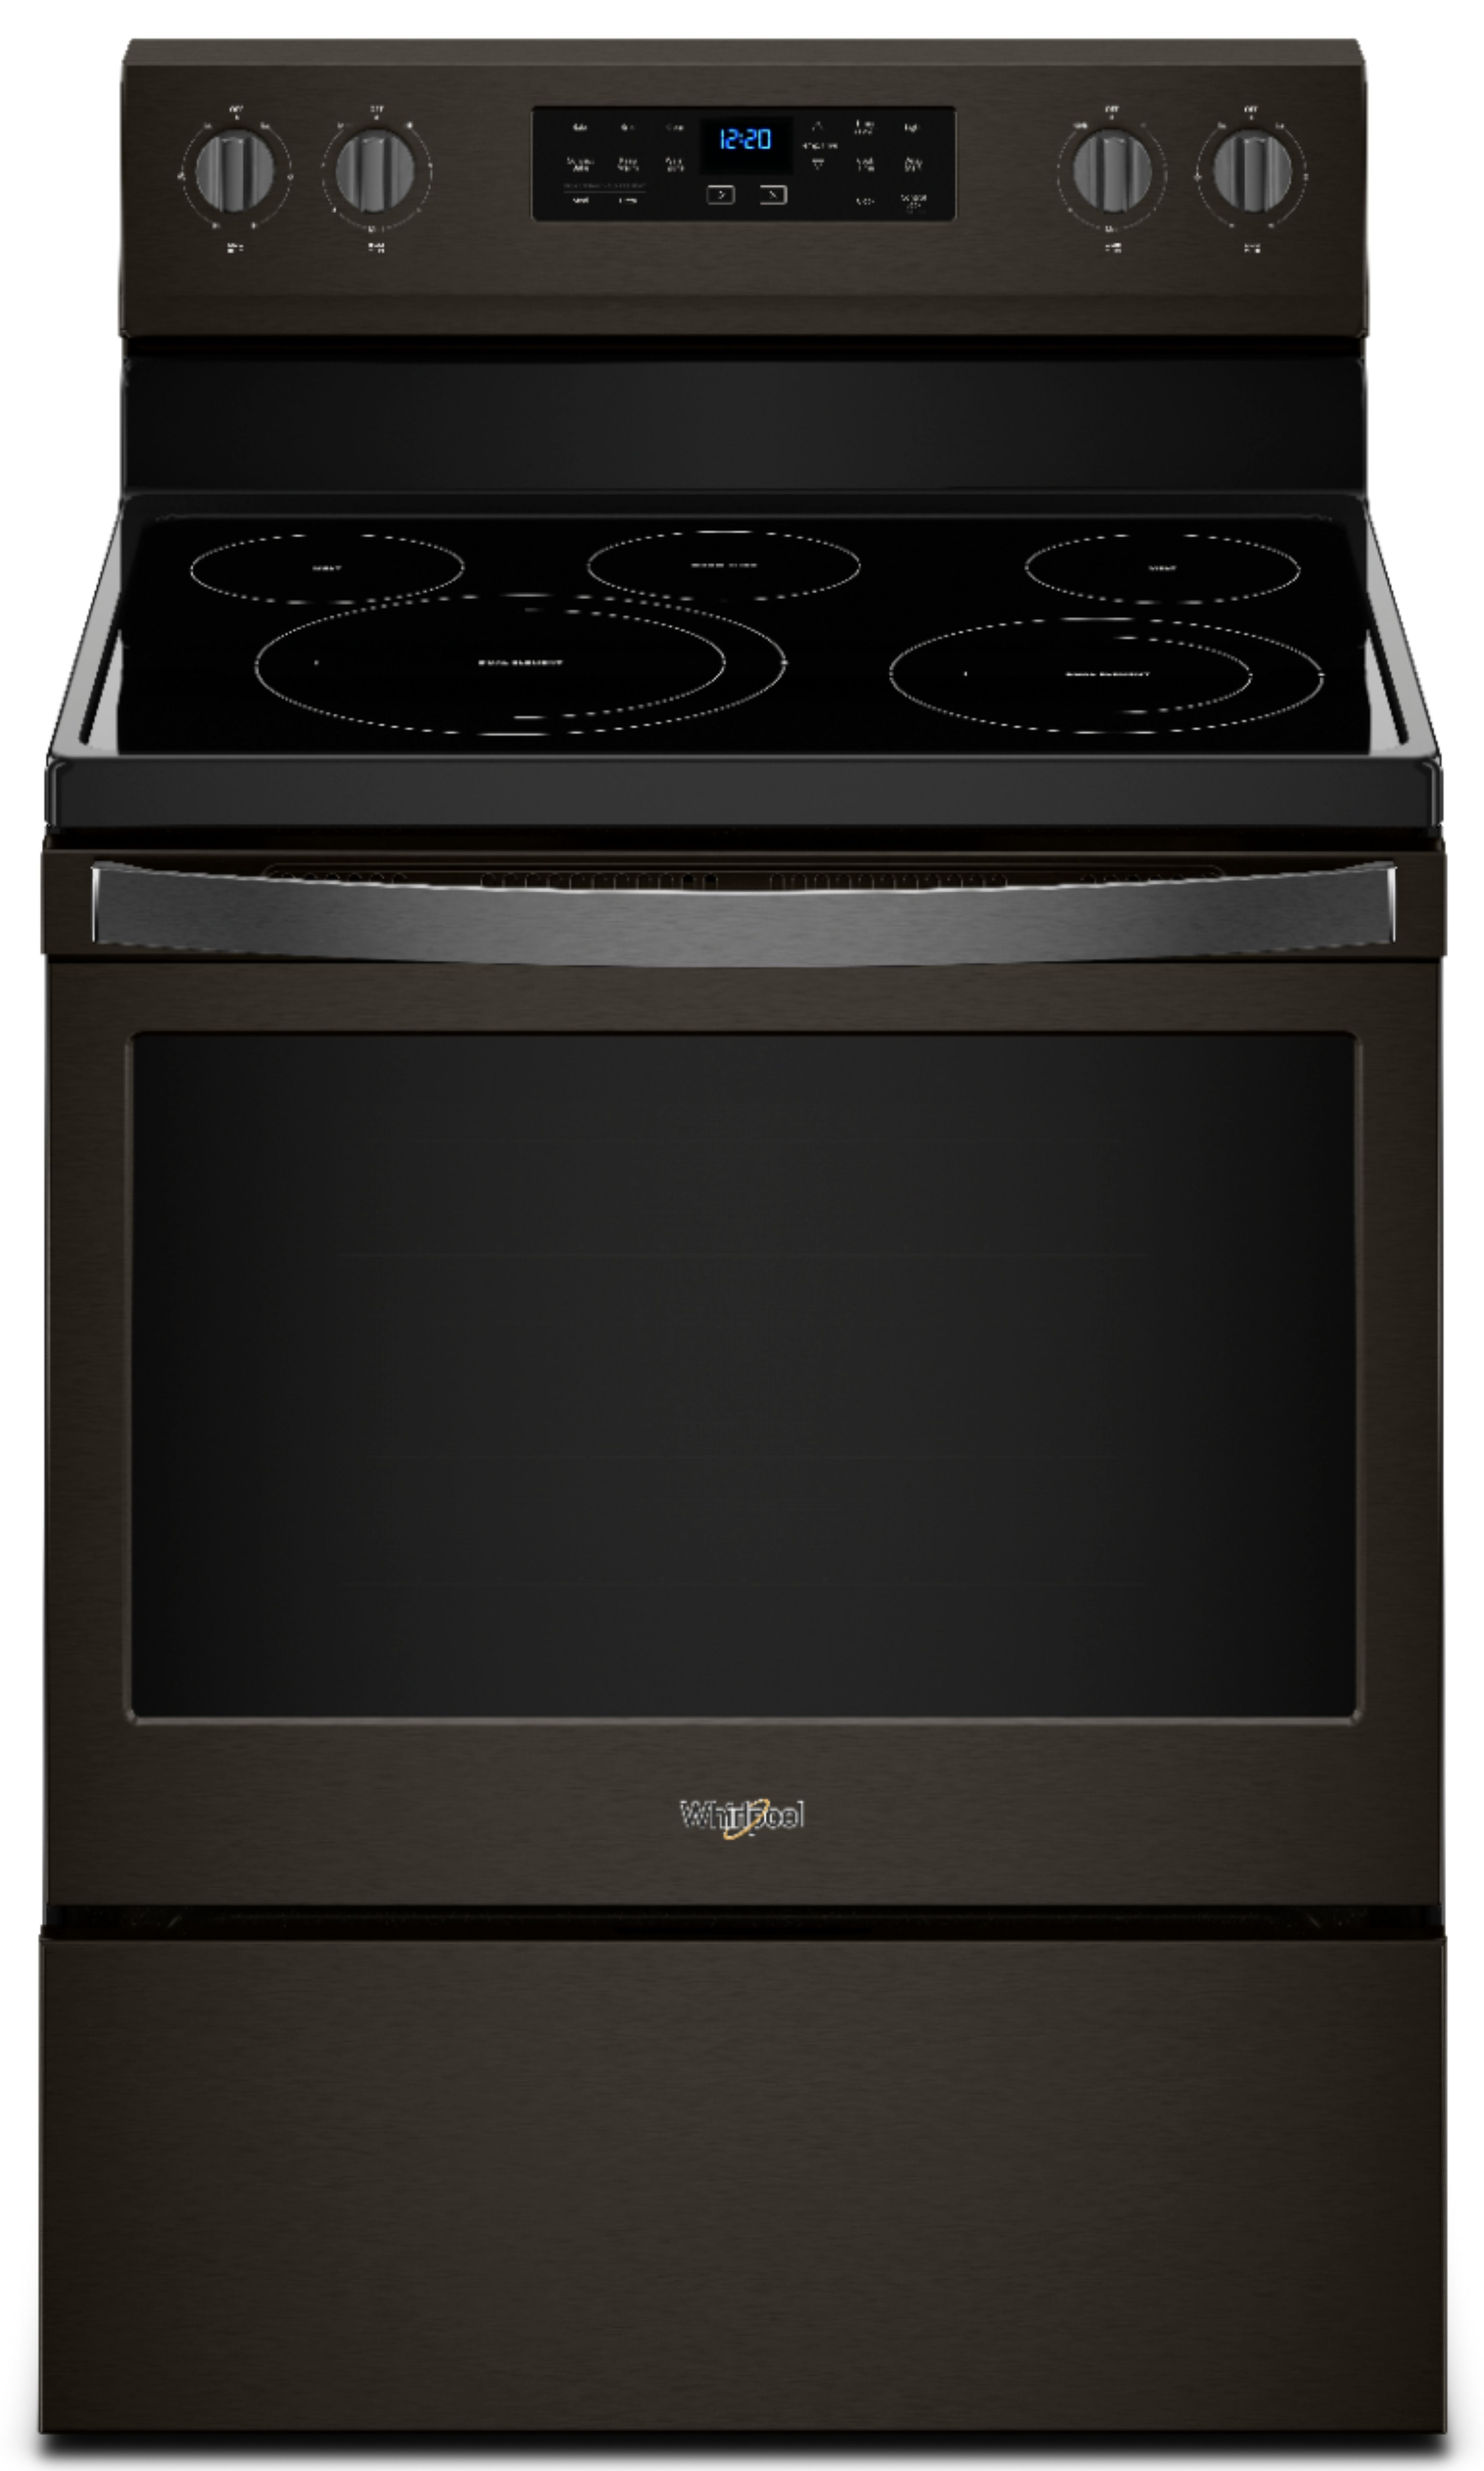 Whirlpool – 5.3 Cu. Ft. Self-Cleaning Freestanding Electric Convection Range – Black stainless steel